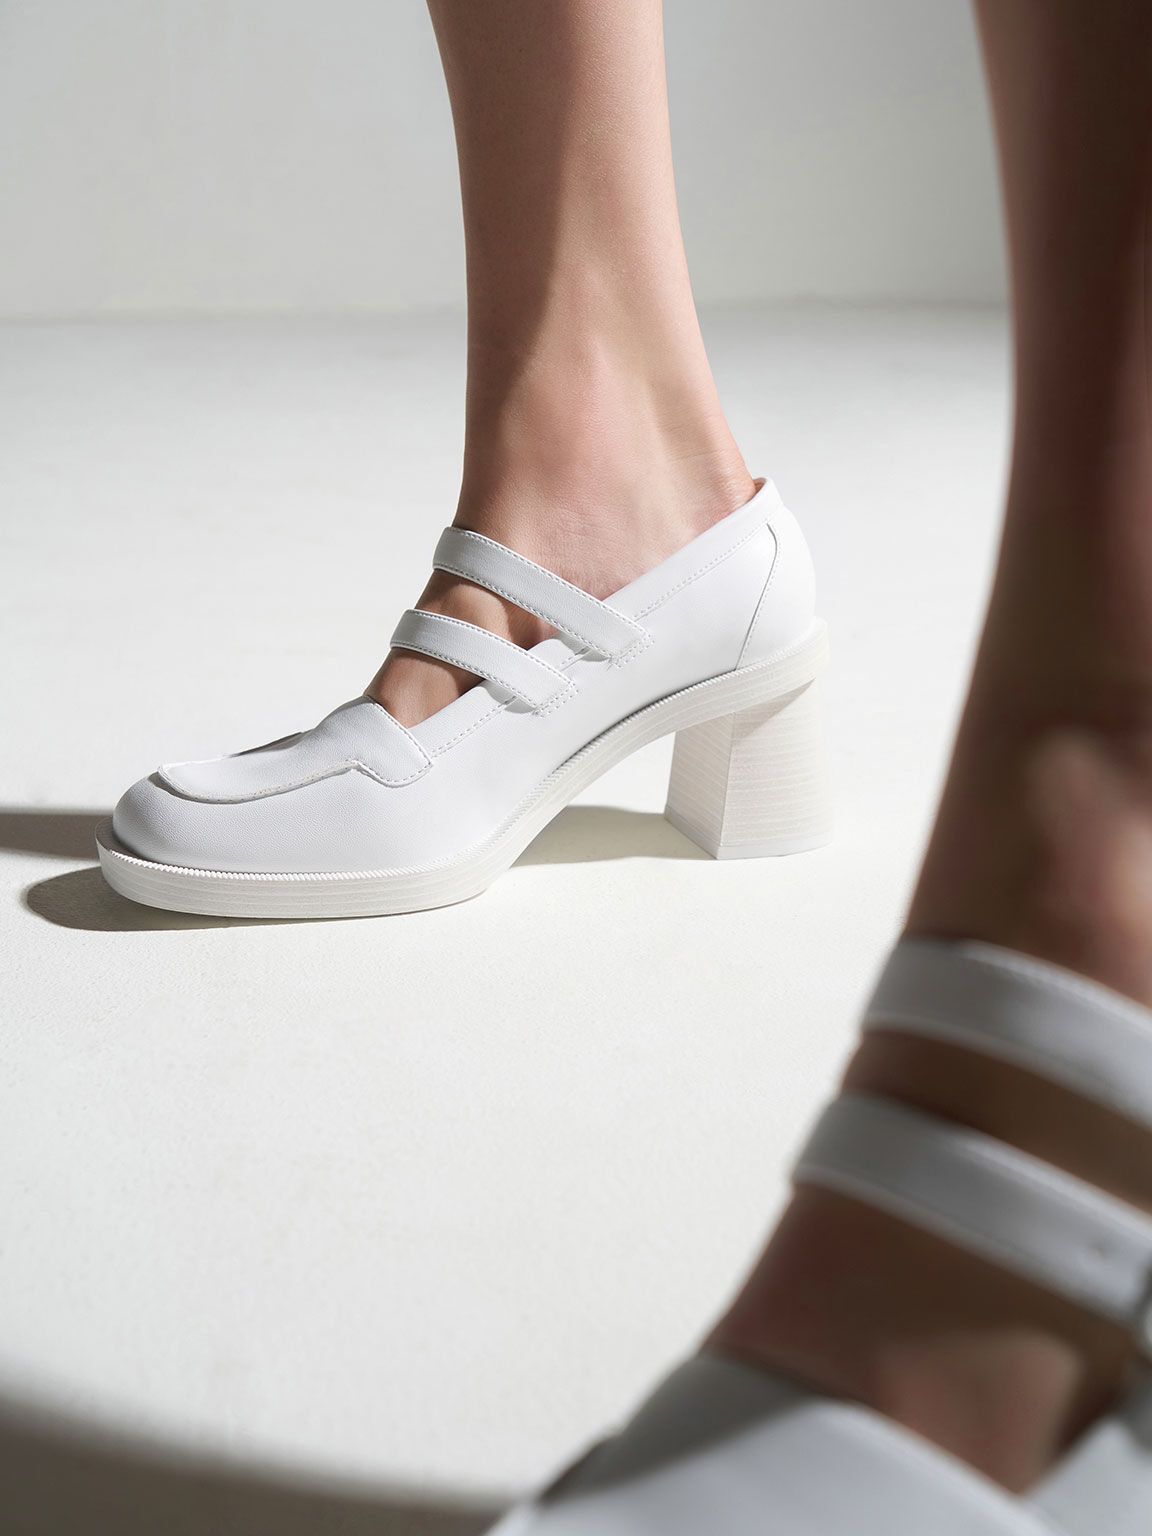 Haisley Double-Strap Mary Jane Pumps, White, hi-res